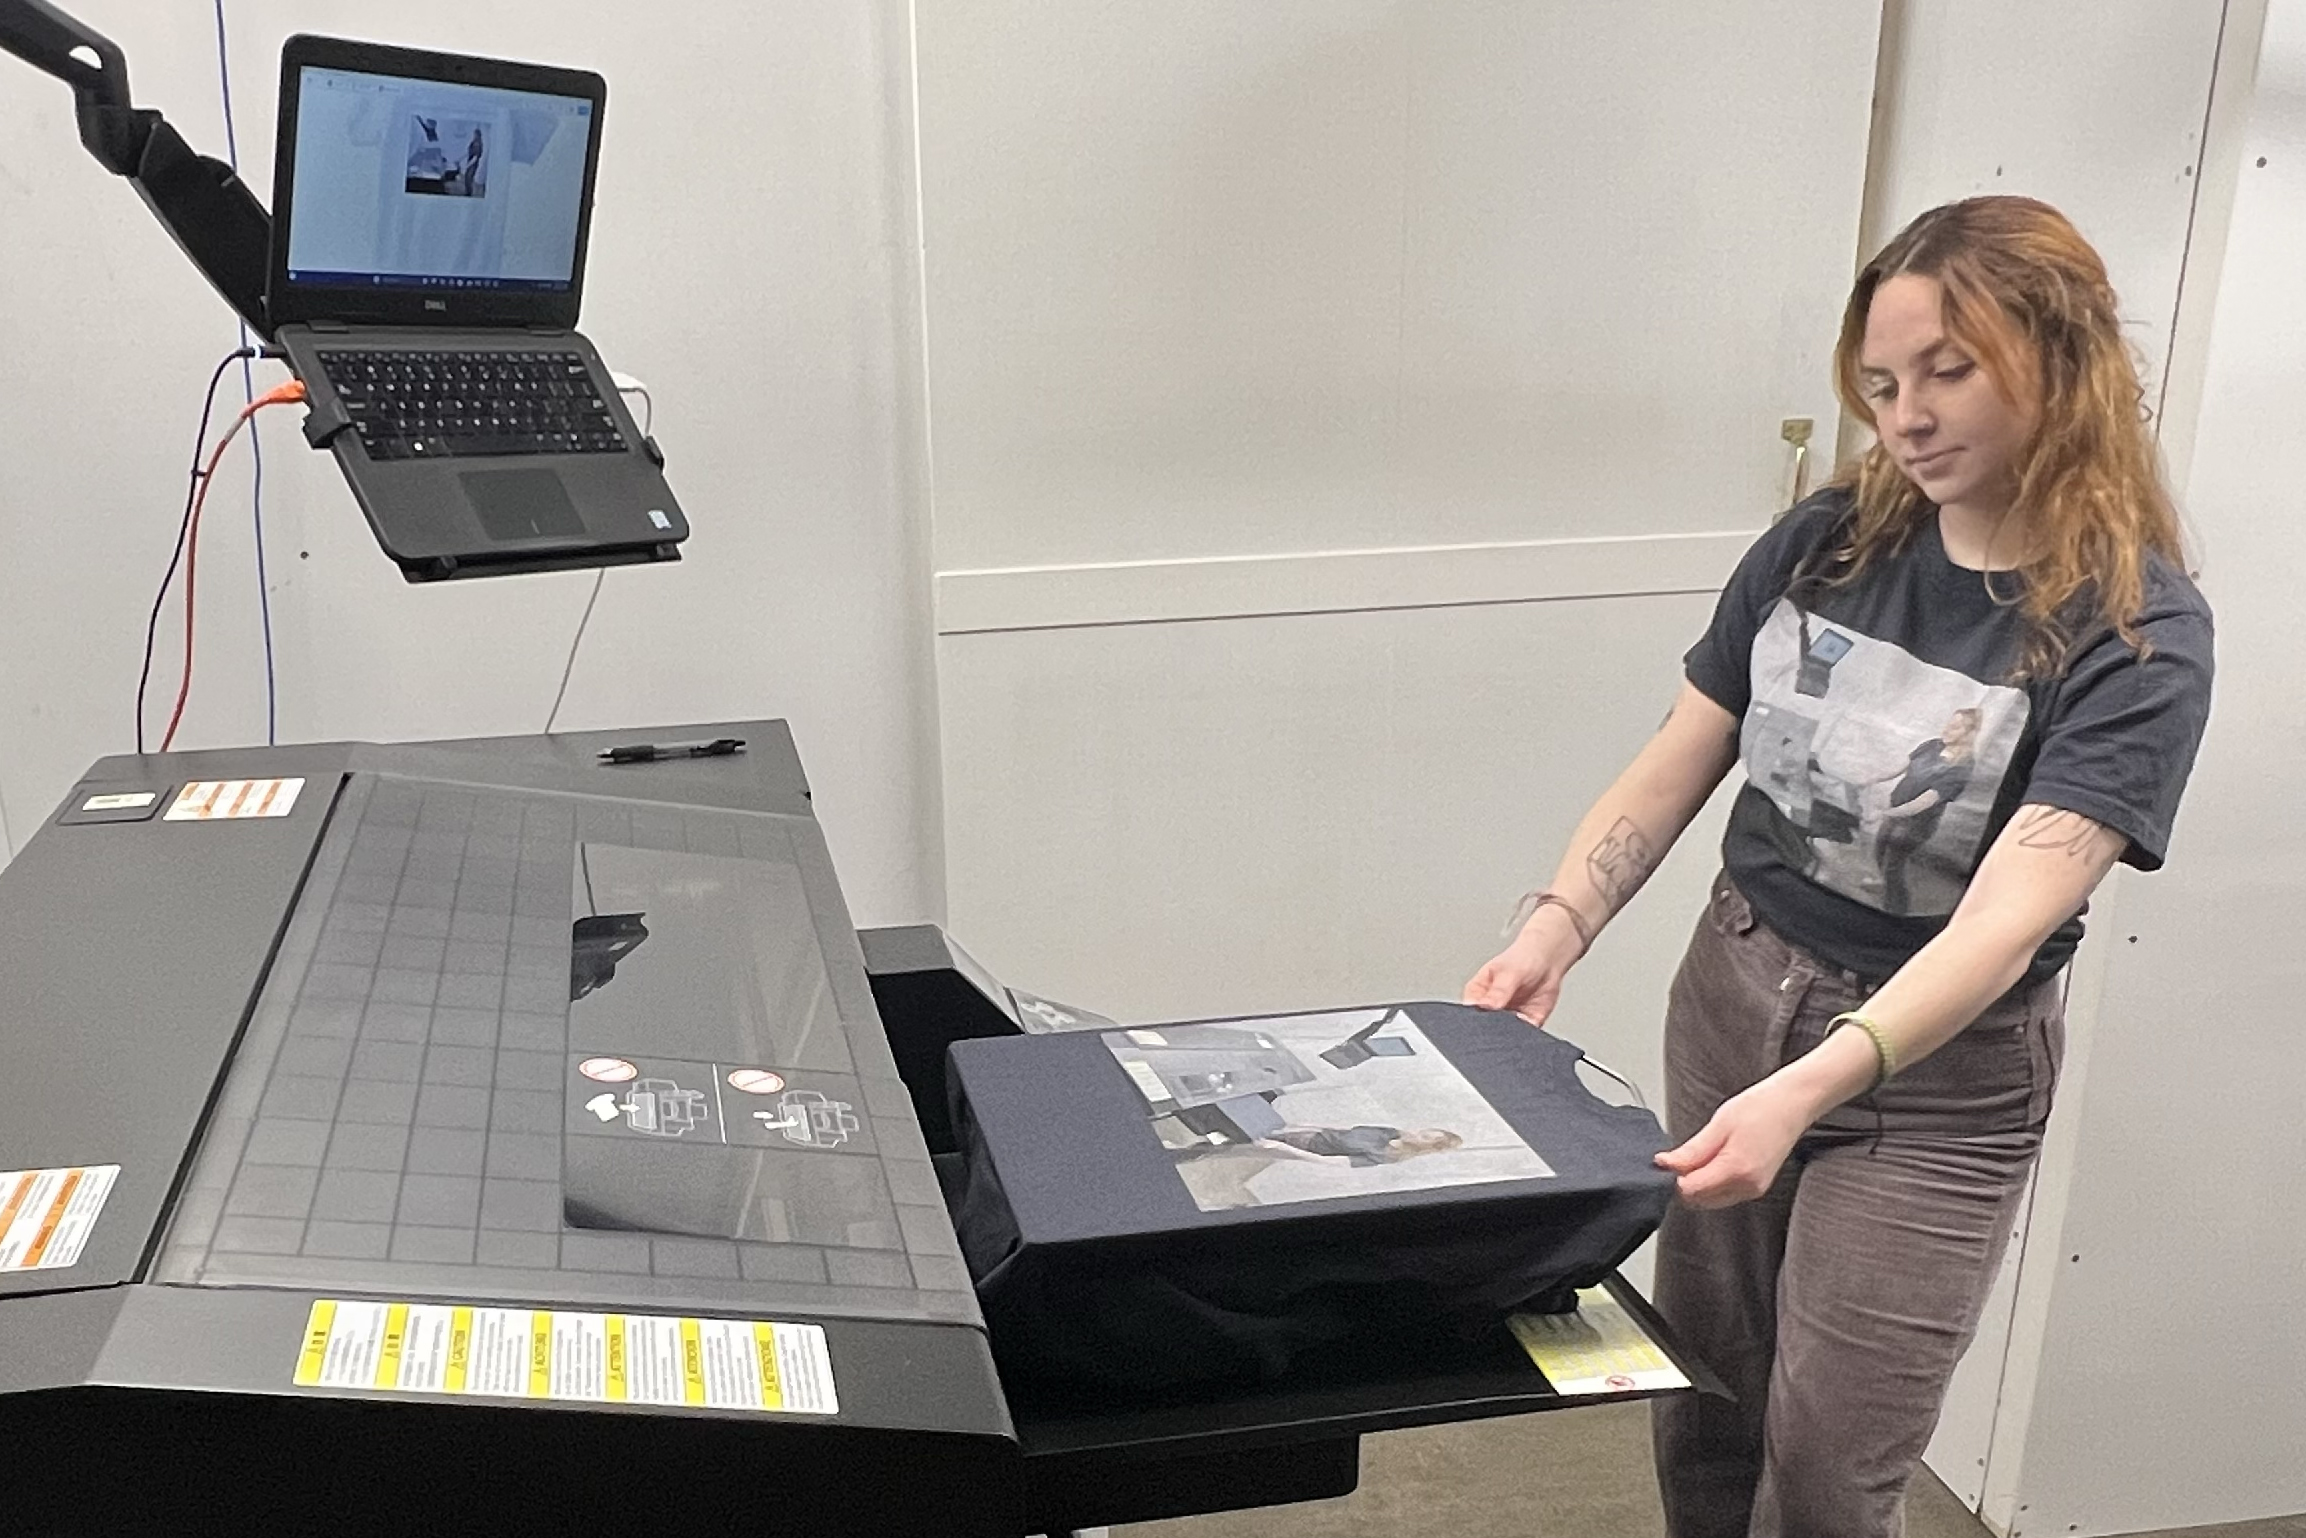 image of the DTG printer in use.